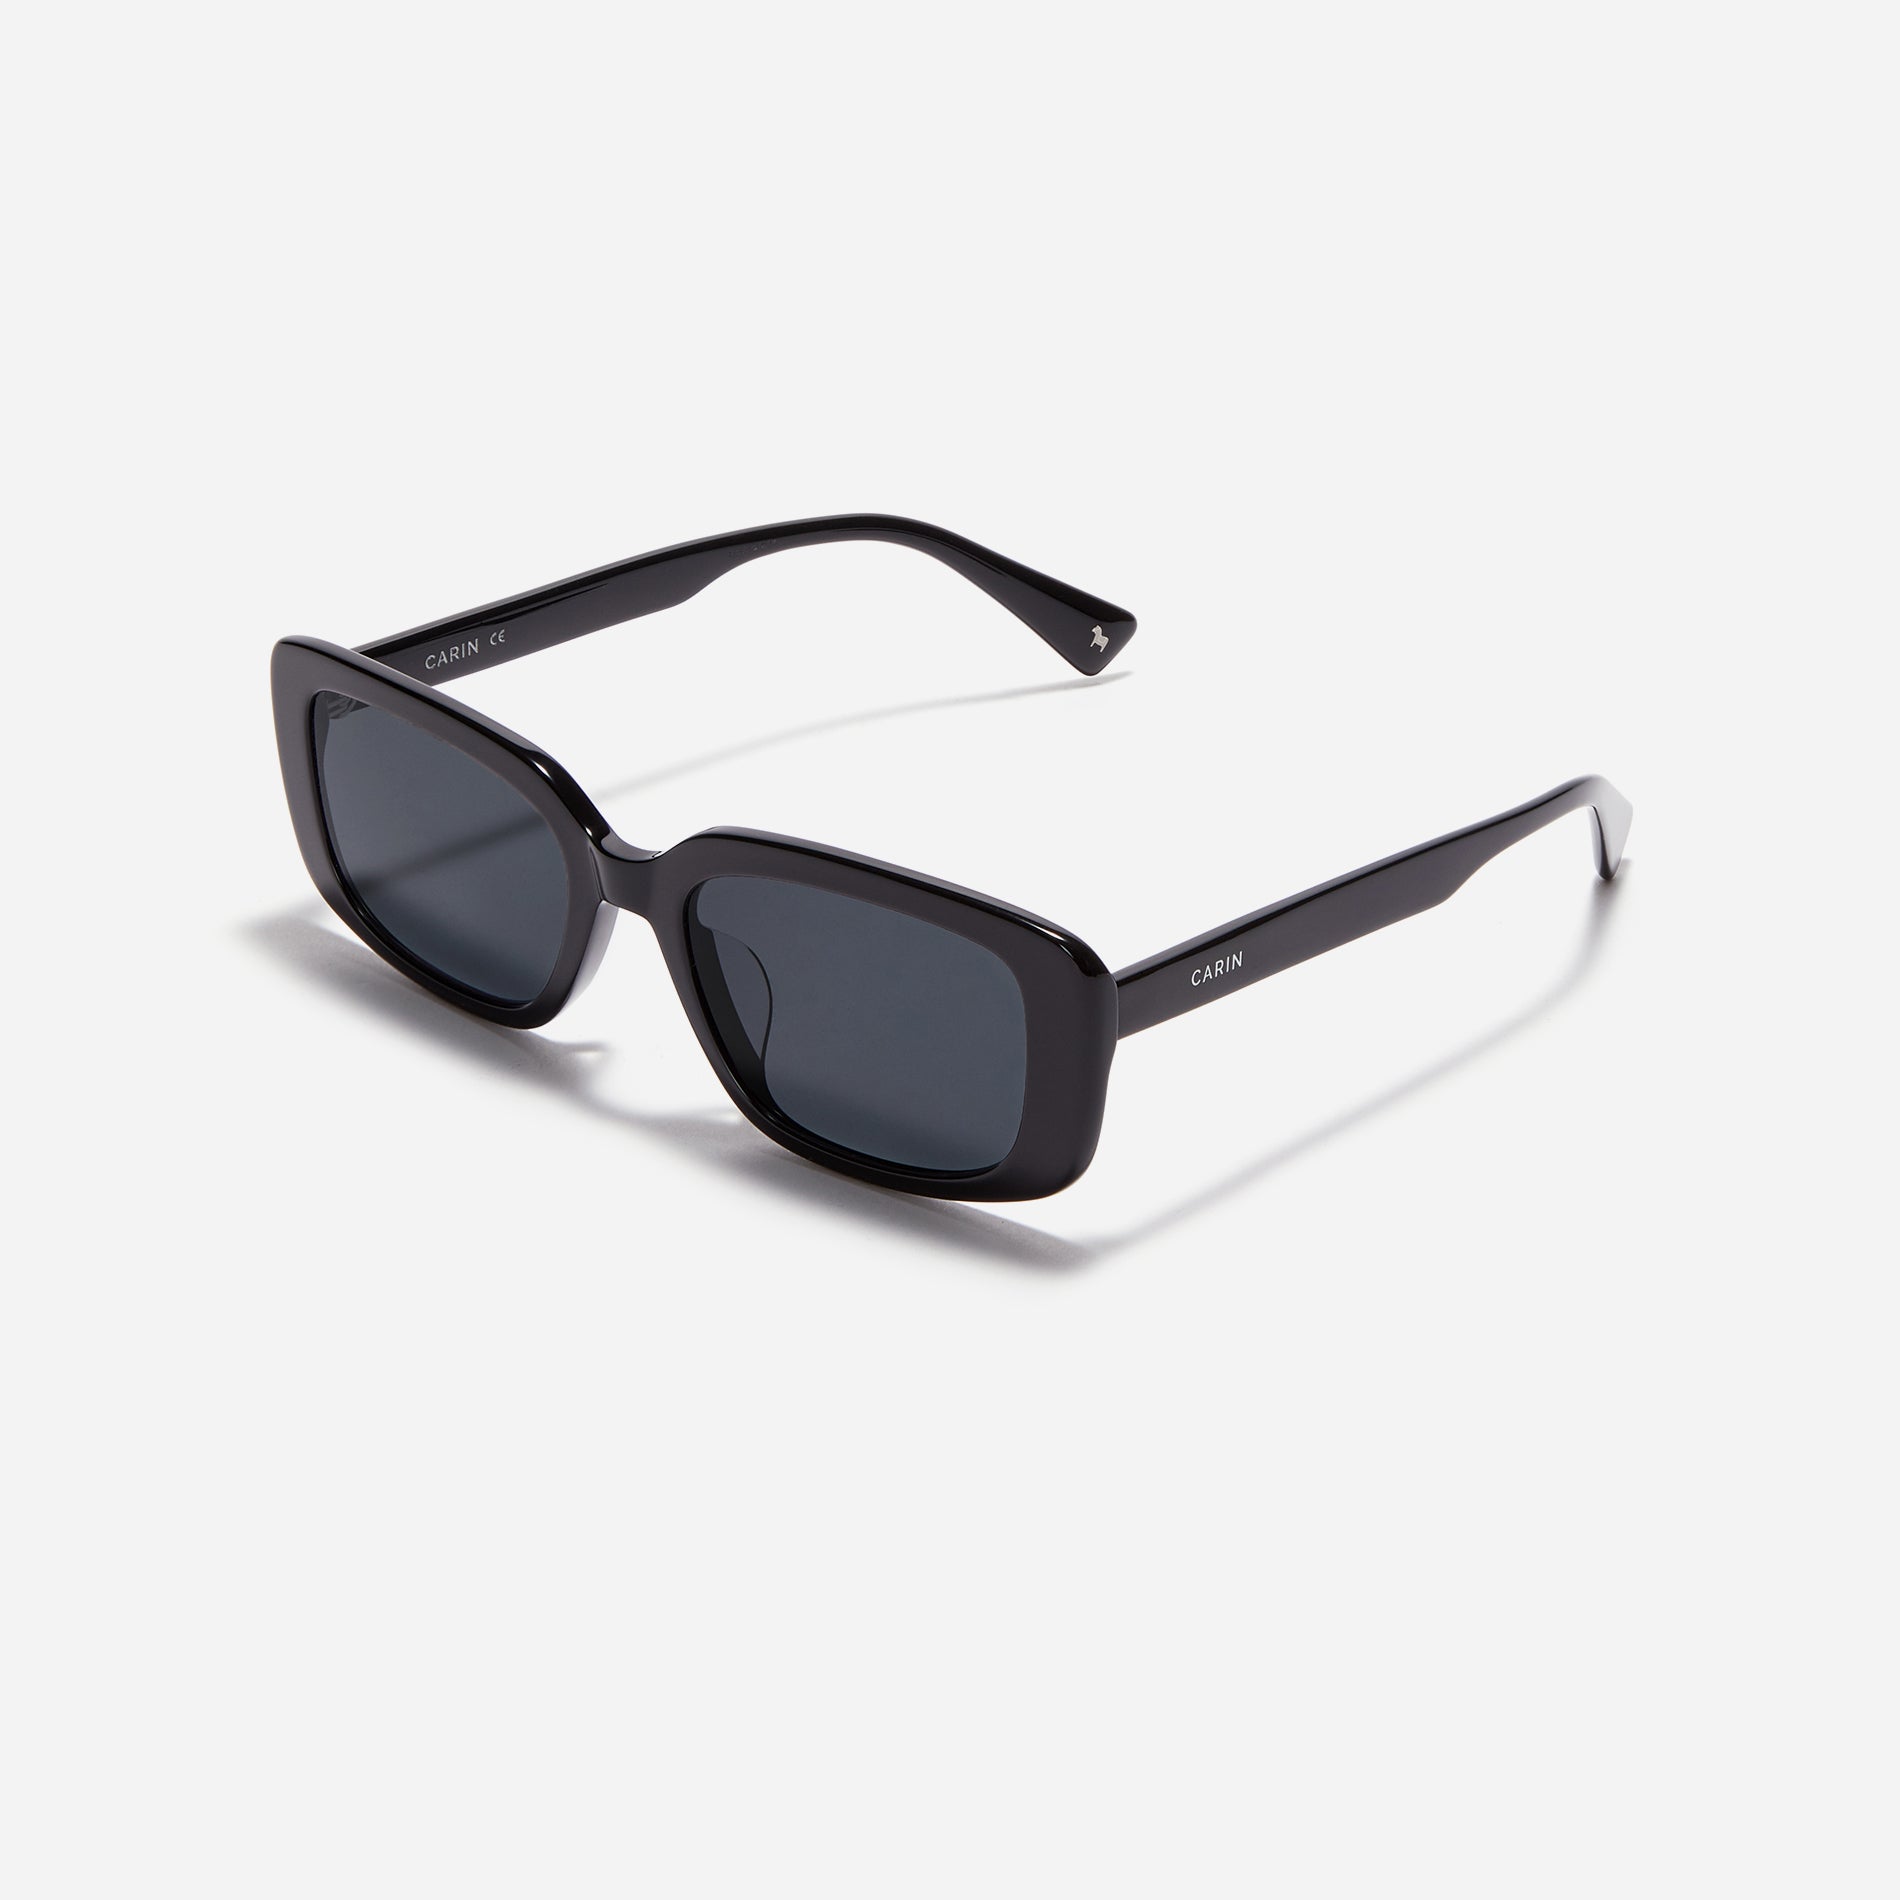 Square-shaped unisex  sunglasses with retro style inspired by '80s